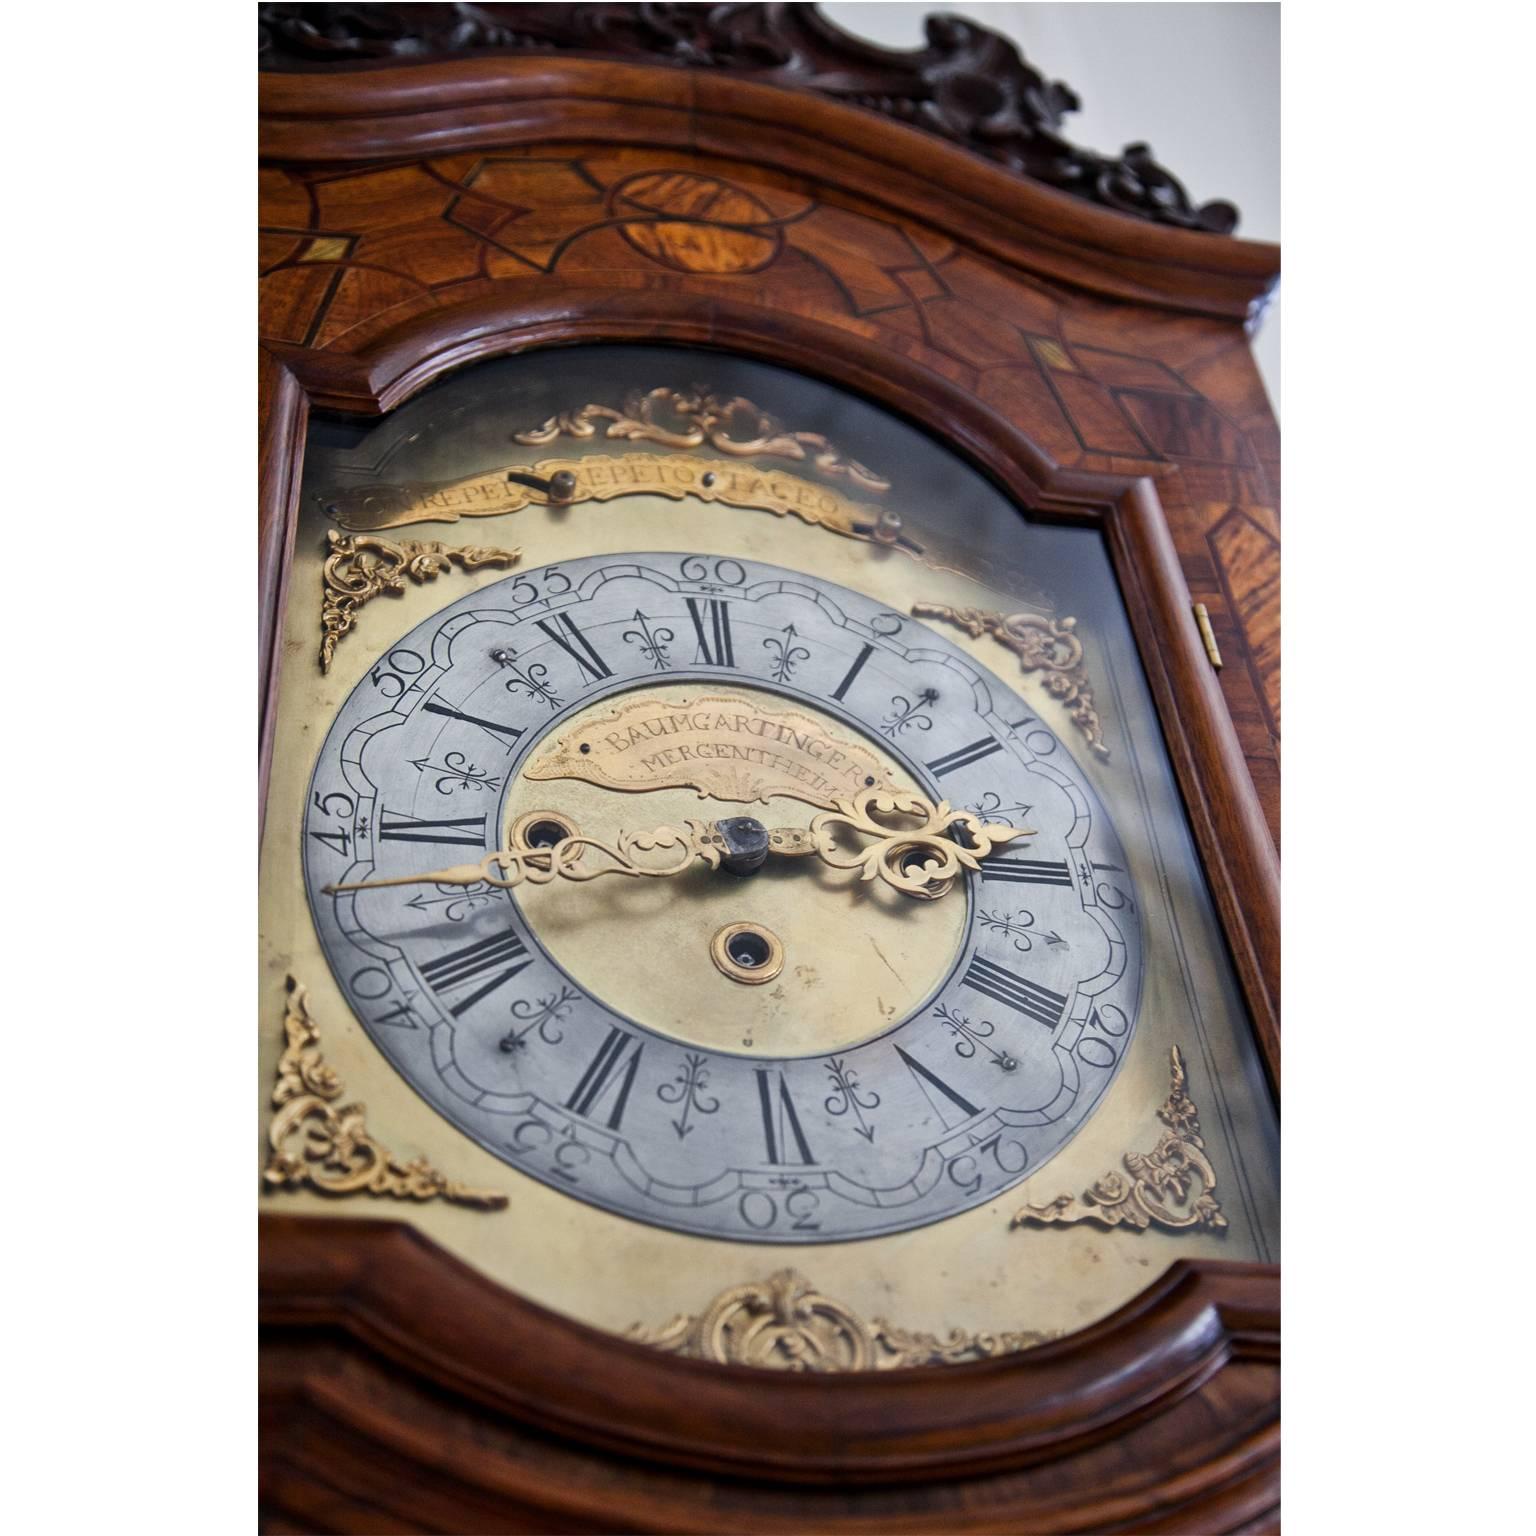 Grandfather clock with carved top and decorated with inlaywork. The clockface with Roman numerals reads Non Repet Repeto Taceo Audio and Baumgartinger Mergentheim.